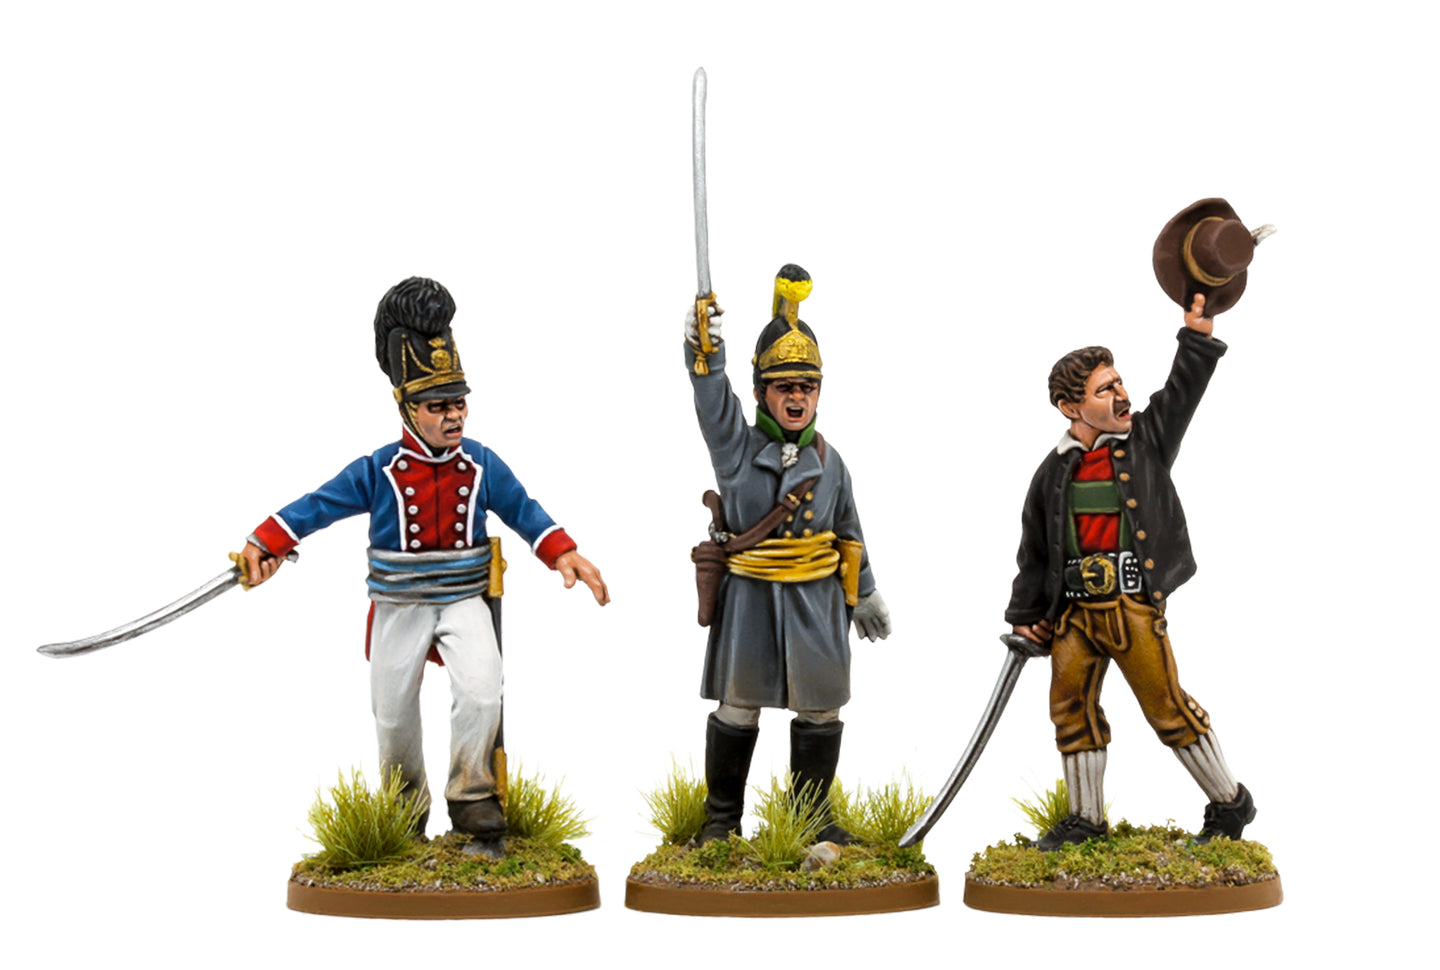 Officers of the Tyrolean Rebellion